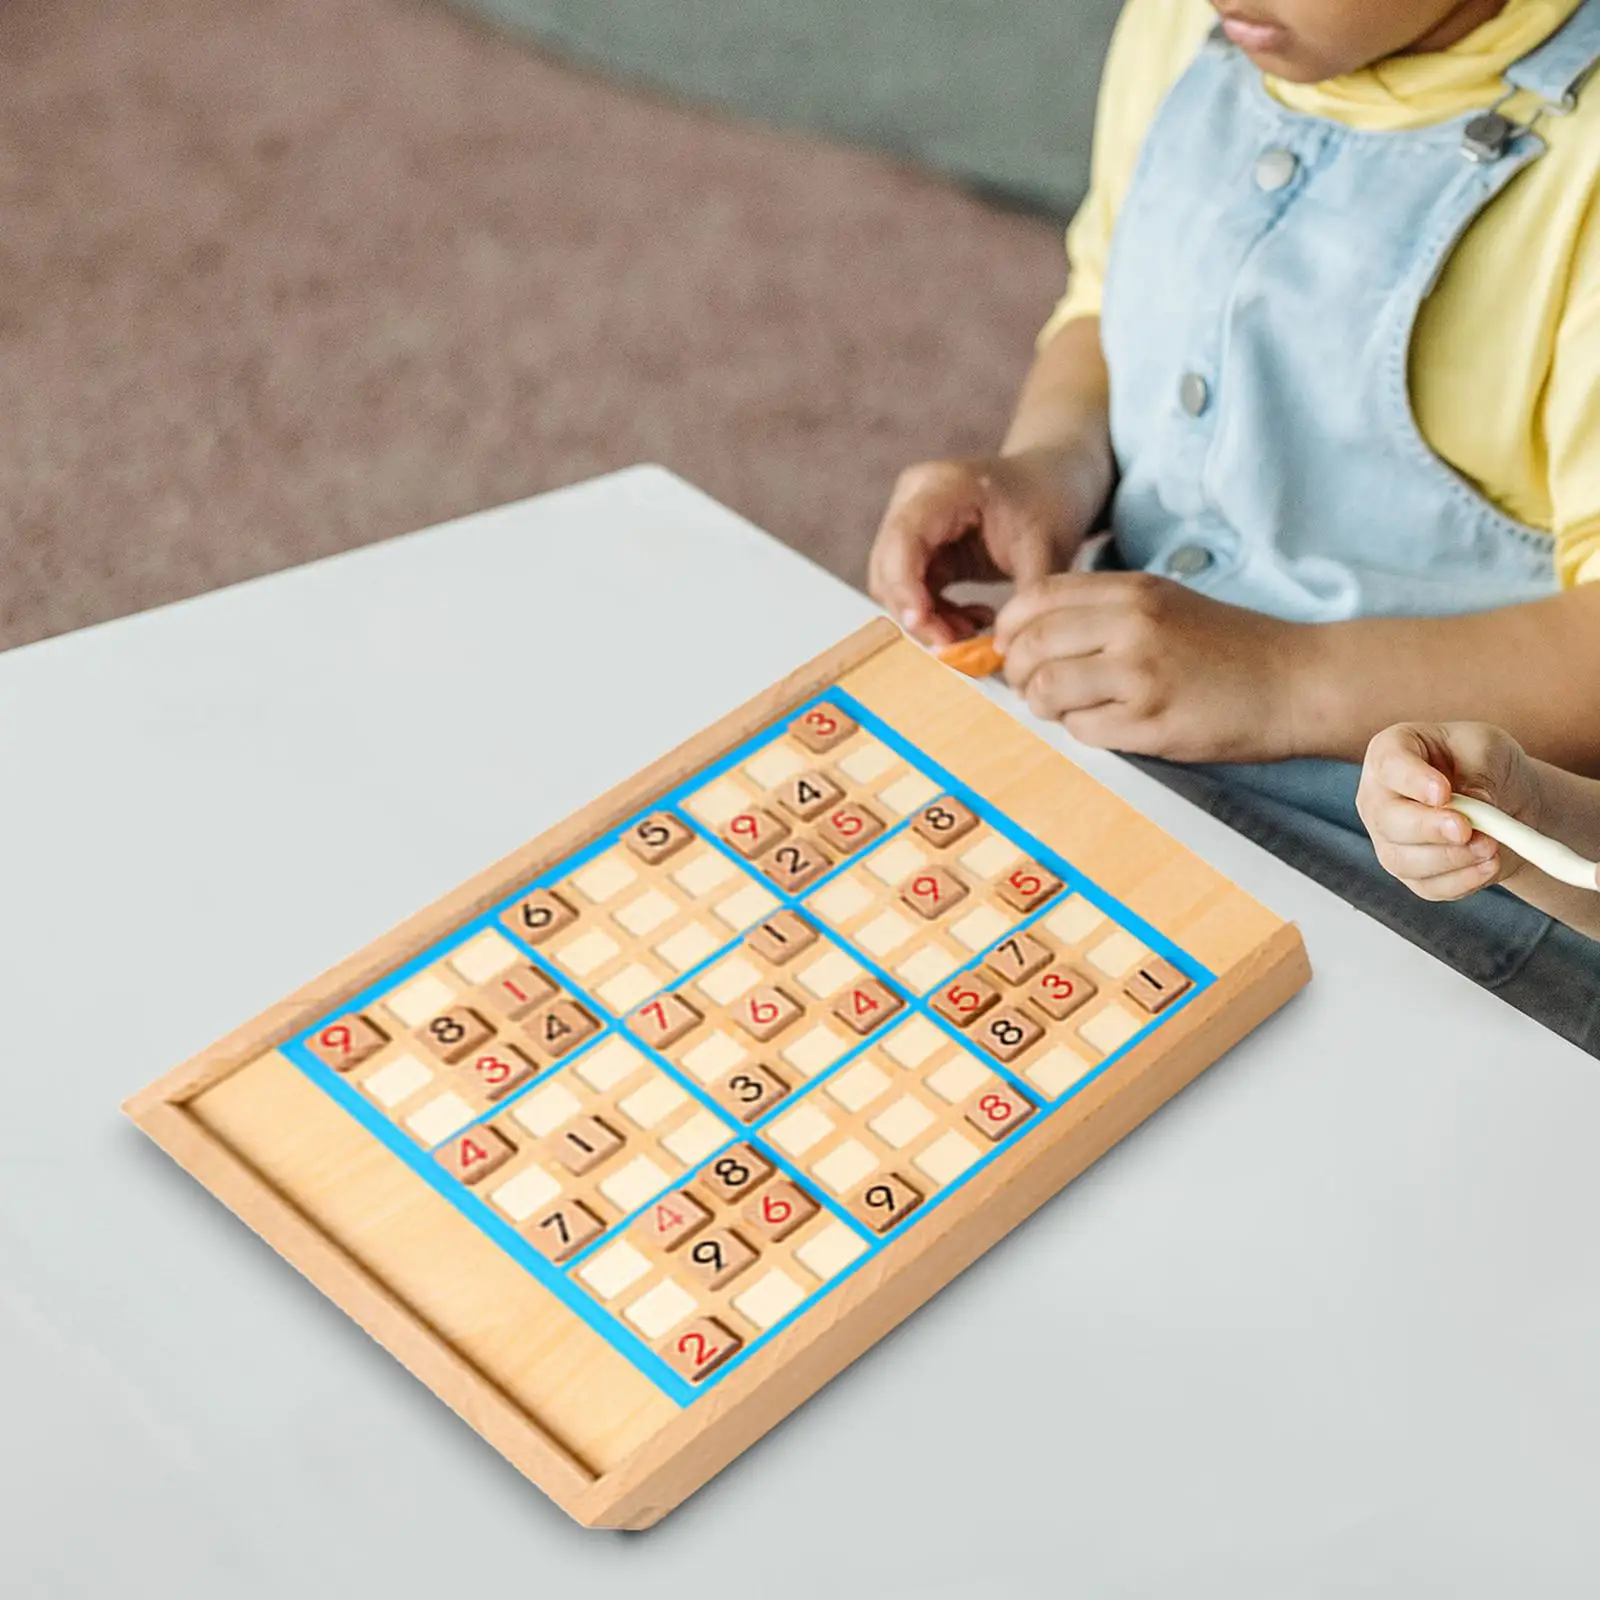 Wooden Puzzle Toys Numbers Match Learning Montessori Toy Developmental Early Educational Toys for Kids Children Birthday Gifts